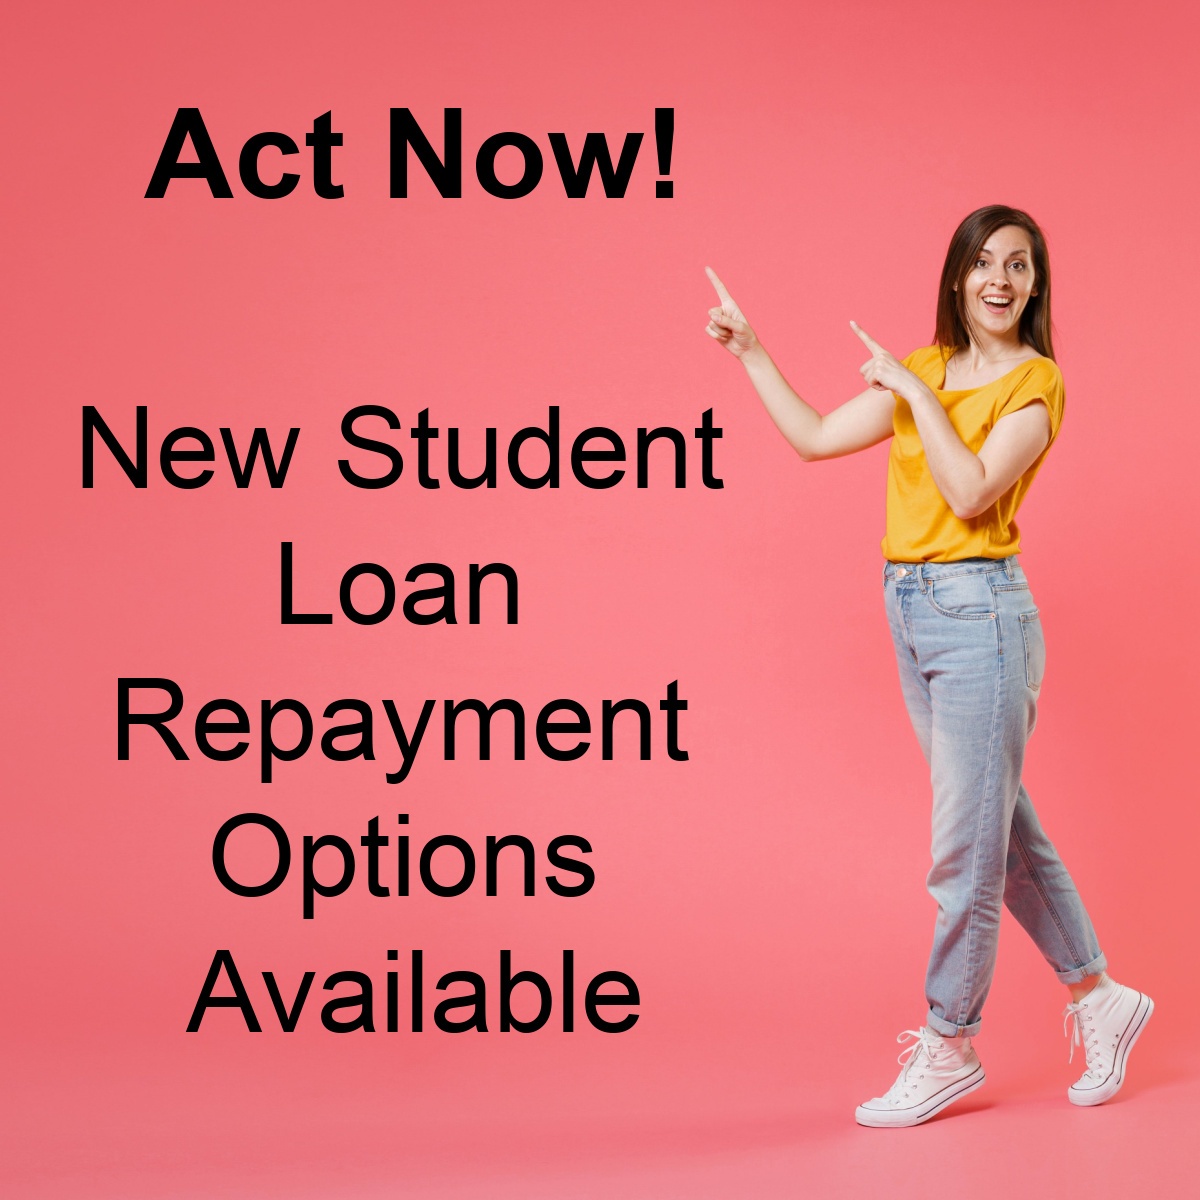 New Student Loan Repayment Options